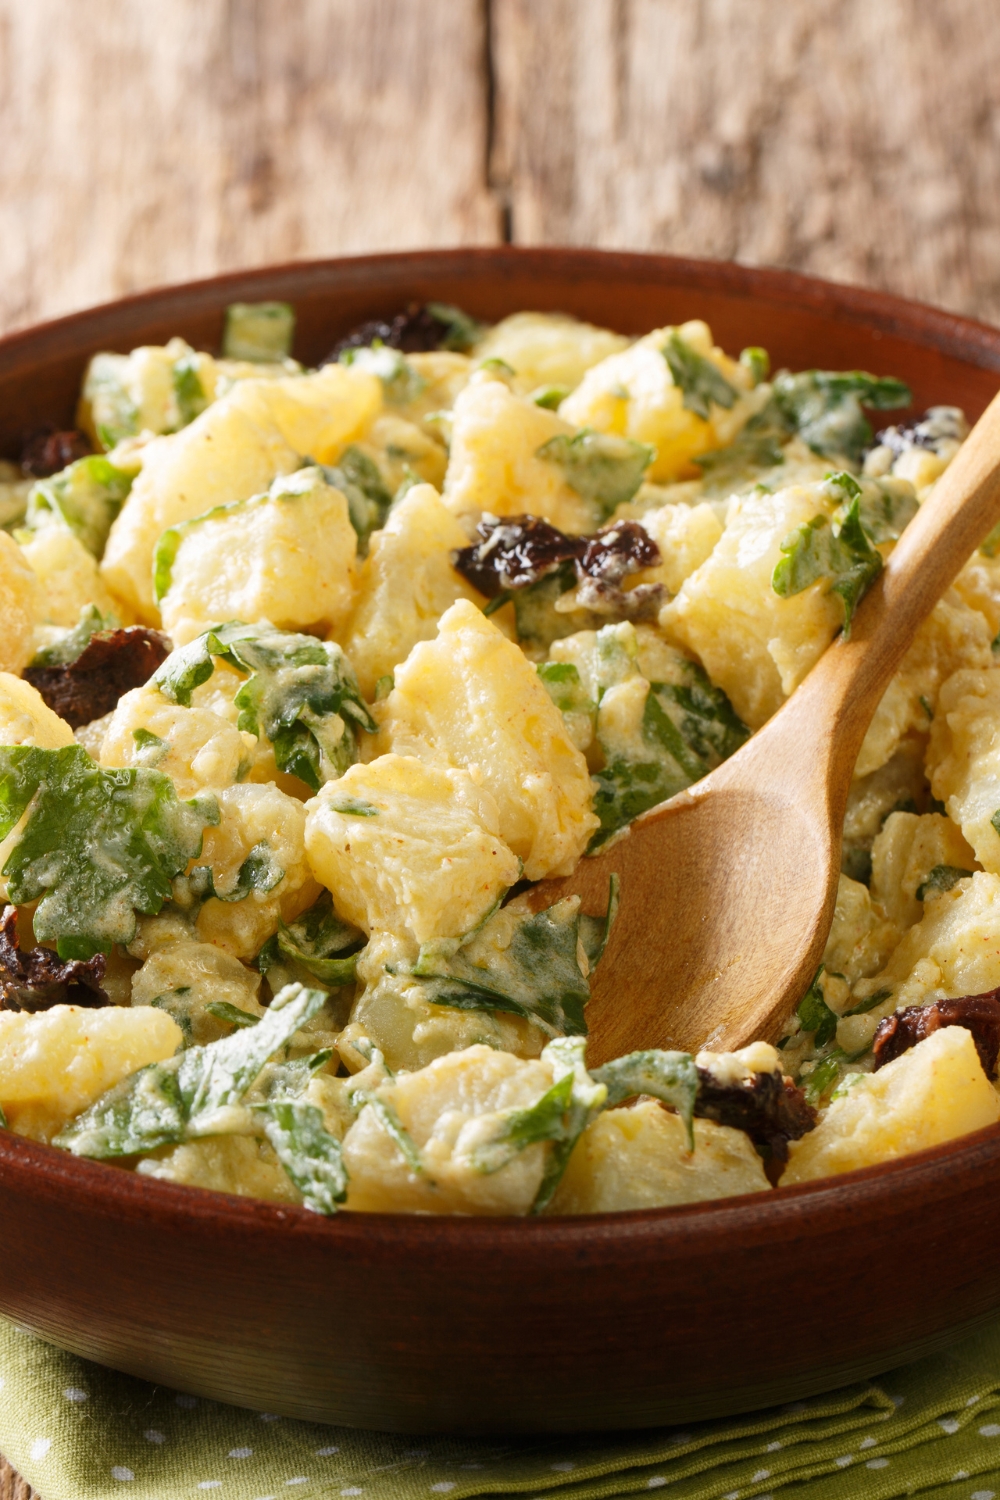 Potato Salad with Herbs, Spices and Dried Olives